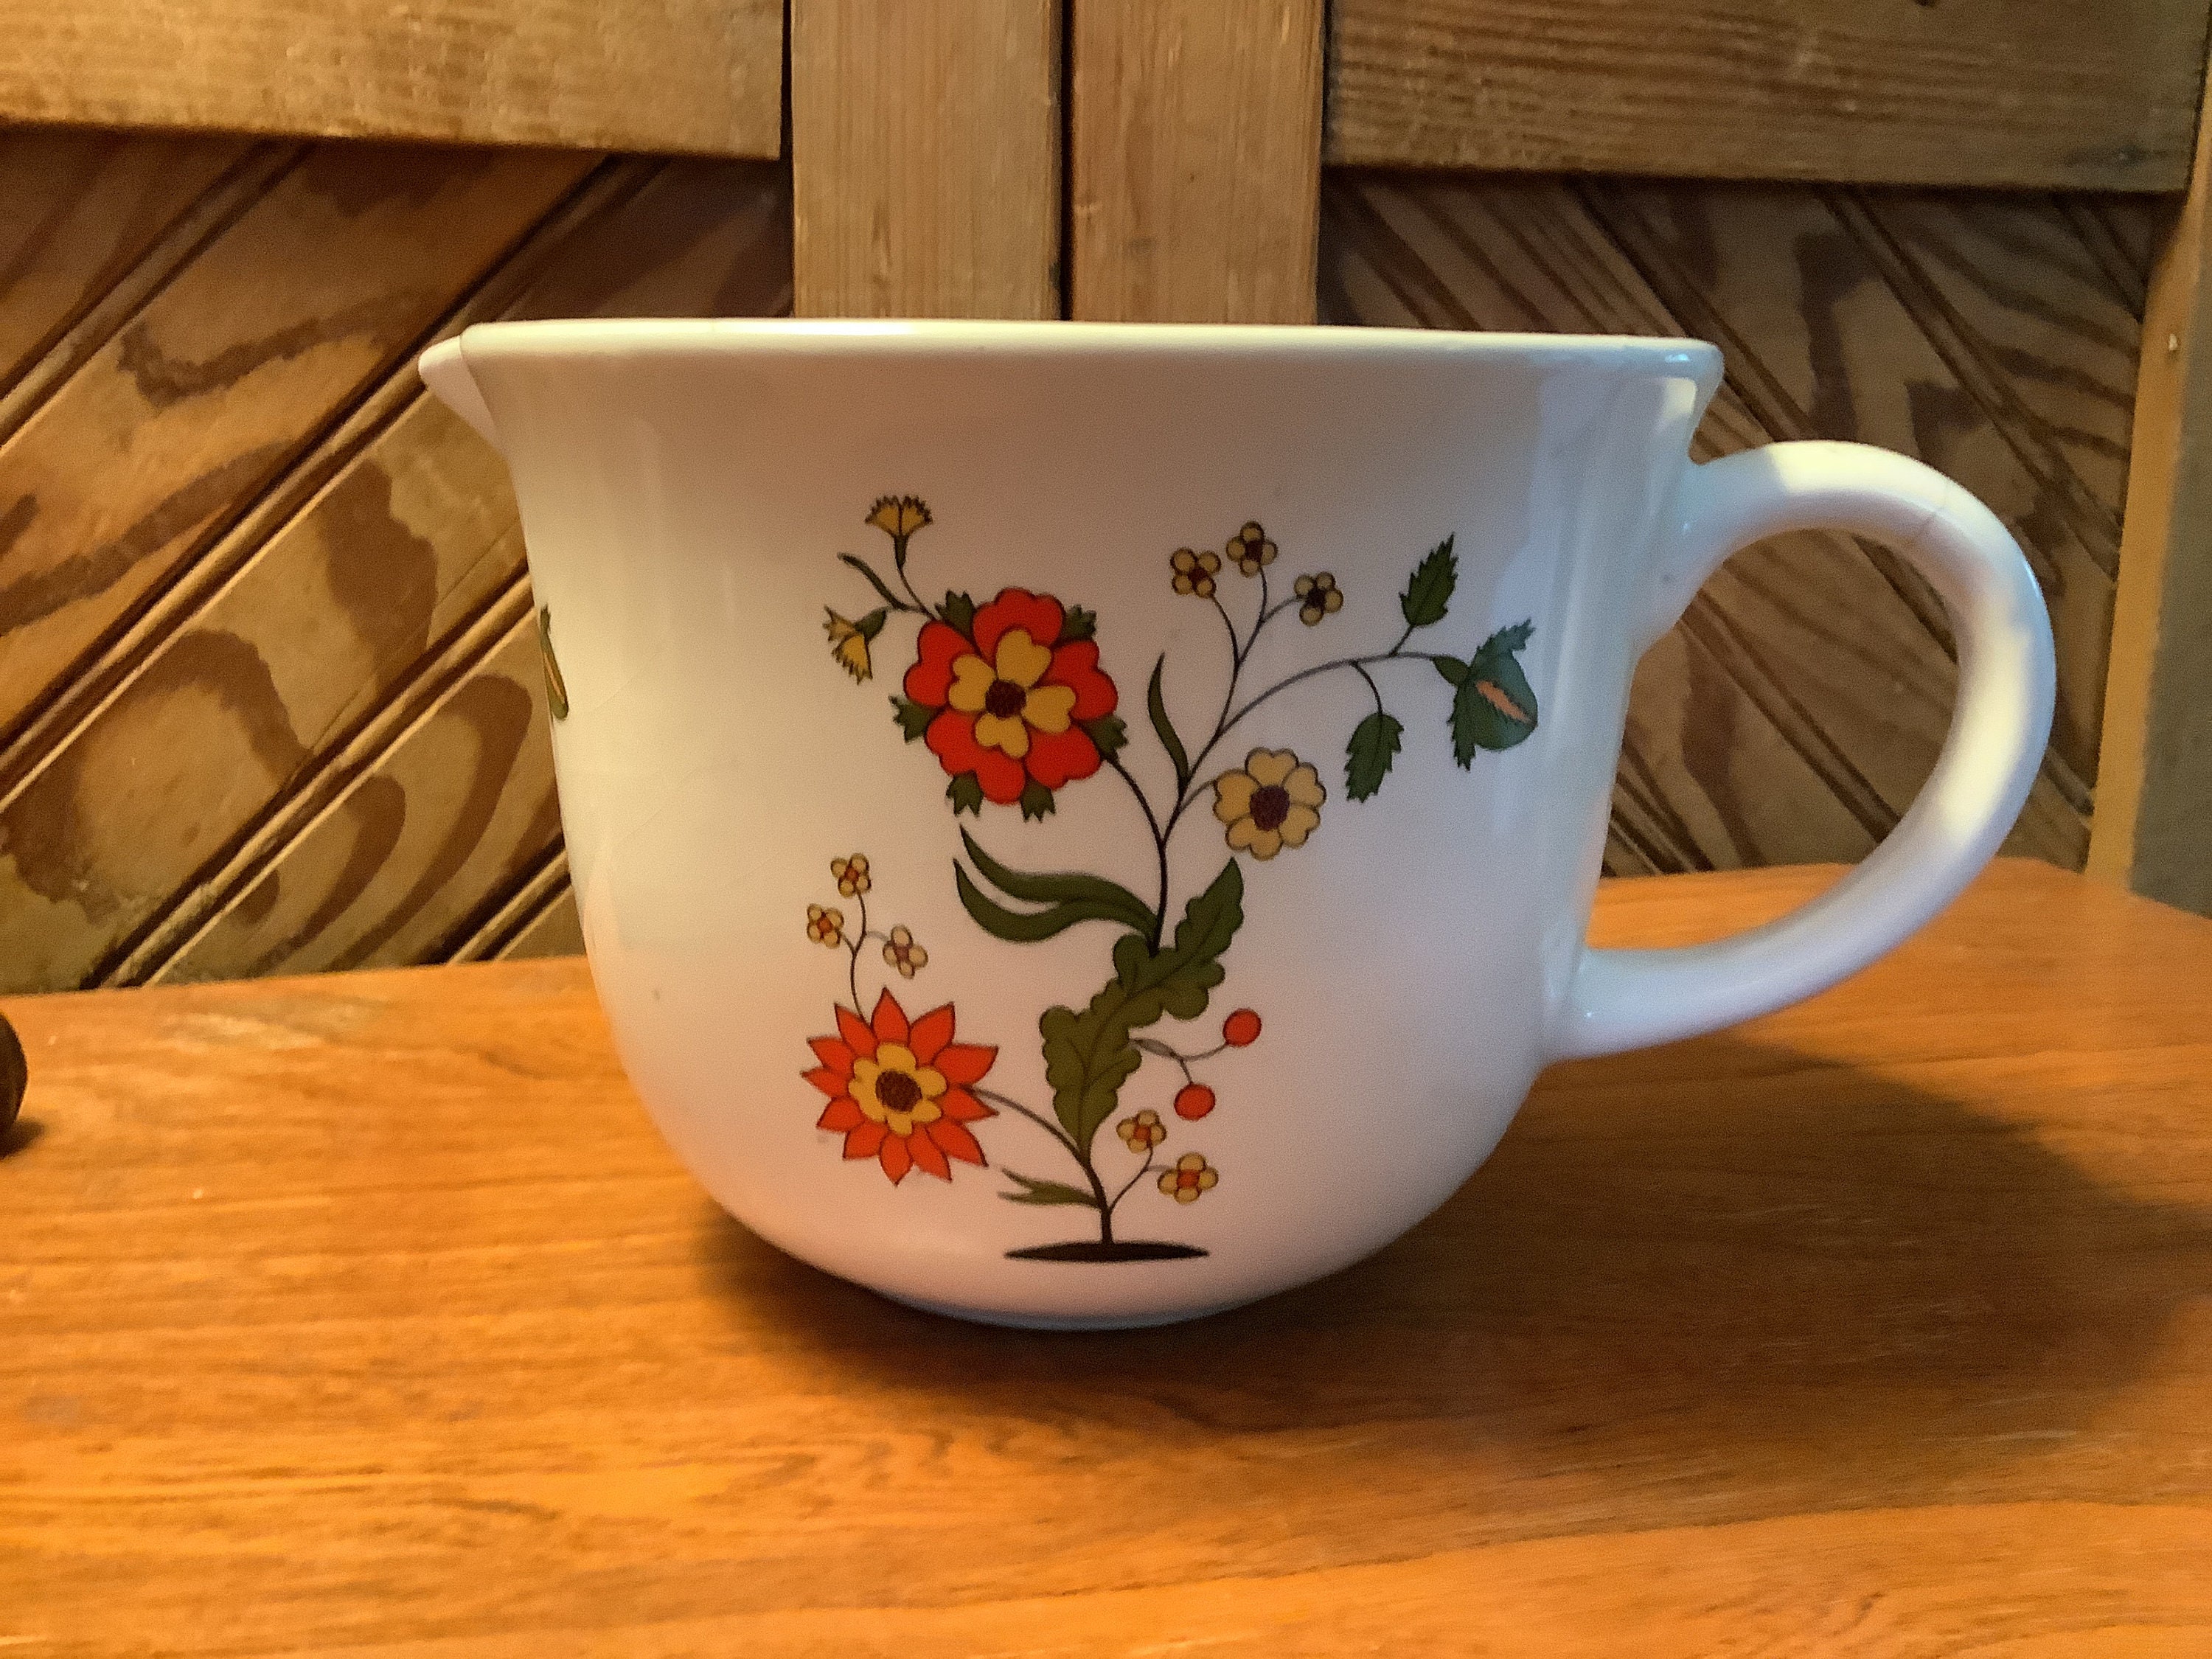 Hand-Painted Ceramic Measuring Cup, Flower Small Bowl, Underglaze Color,  Super Beautiful, Baking Storage